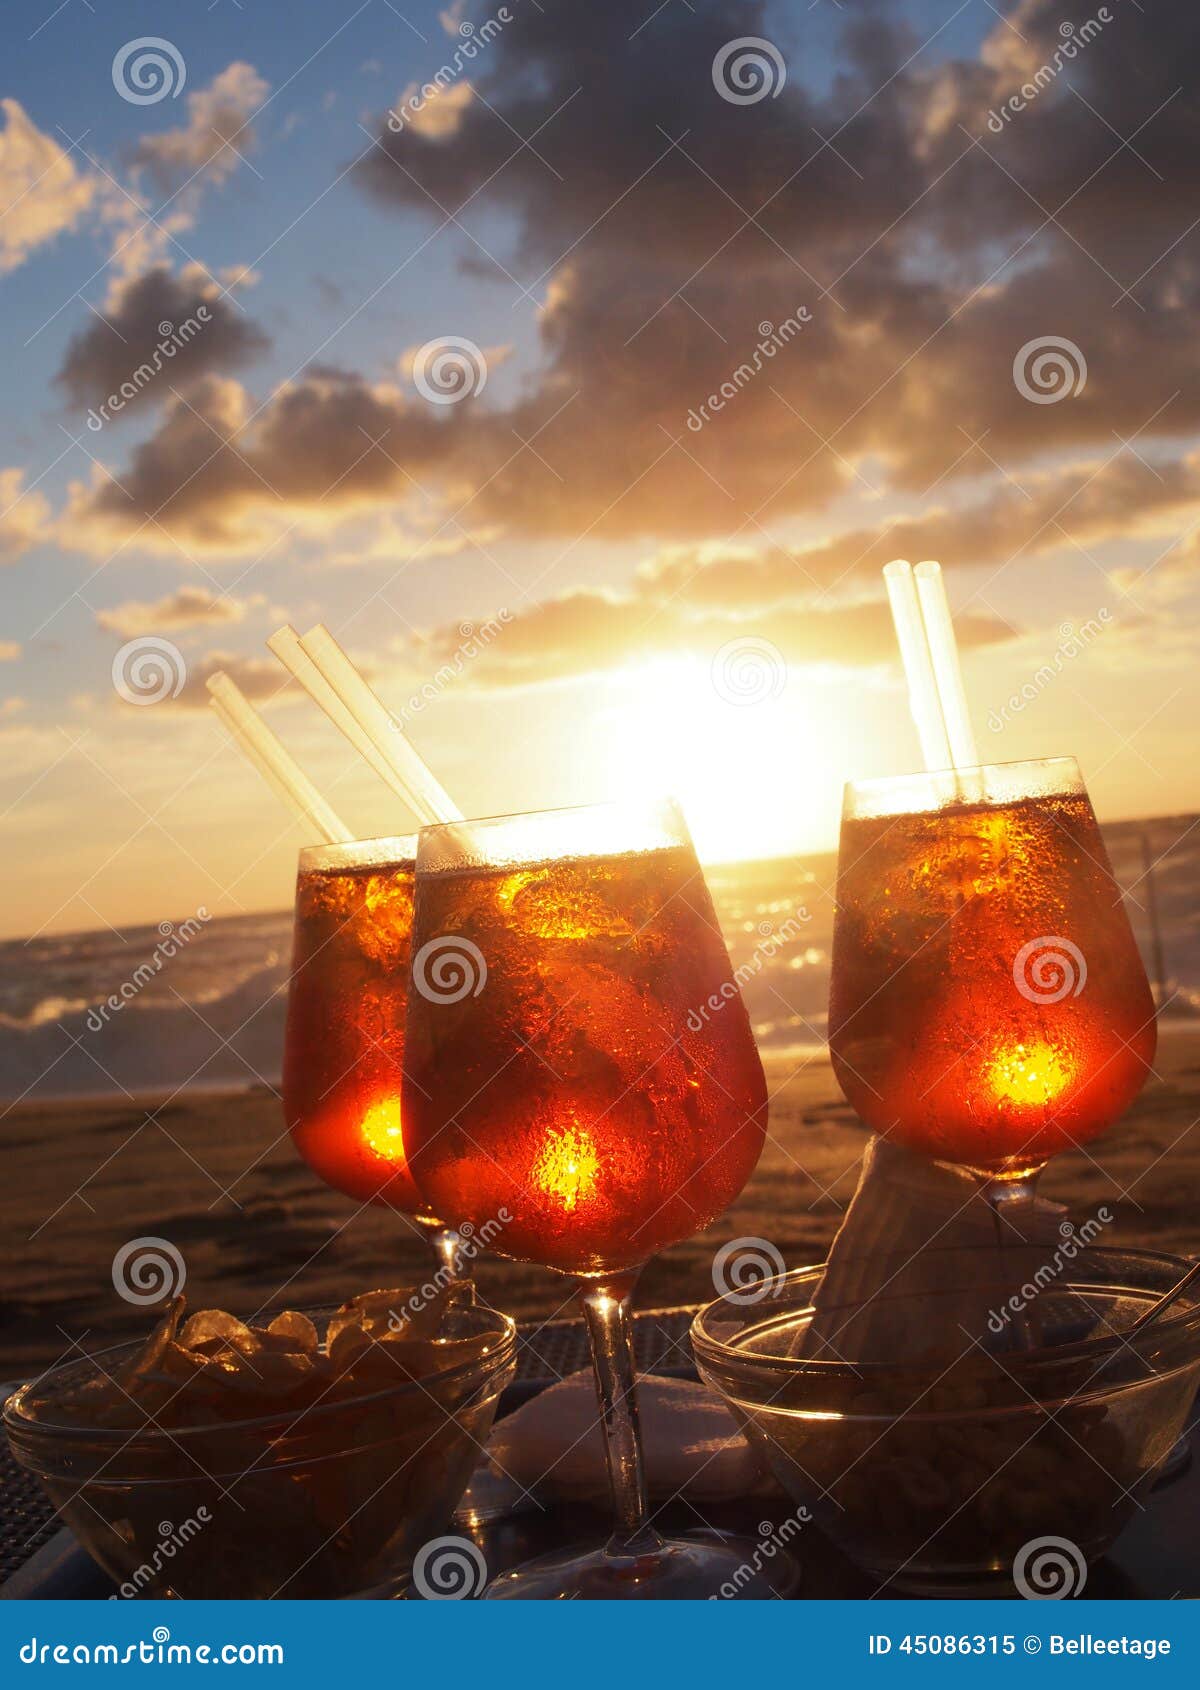 Cold drink at the beach stock image. Image of glasses - 45086315